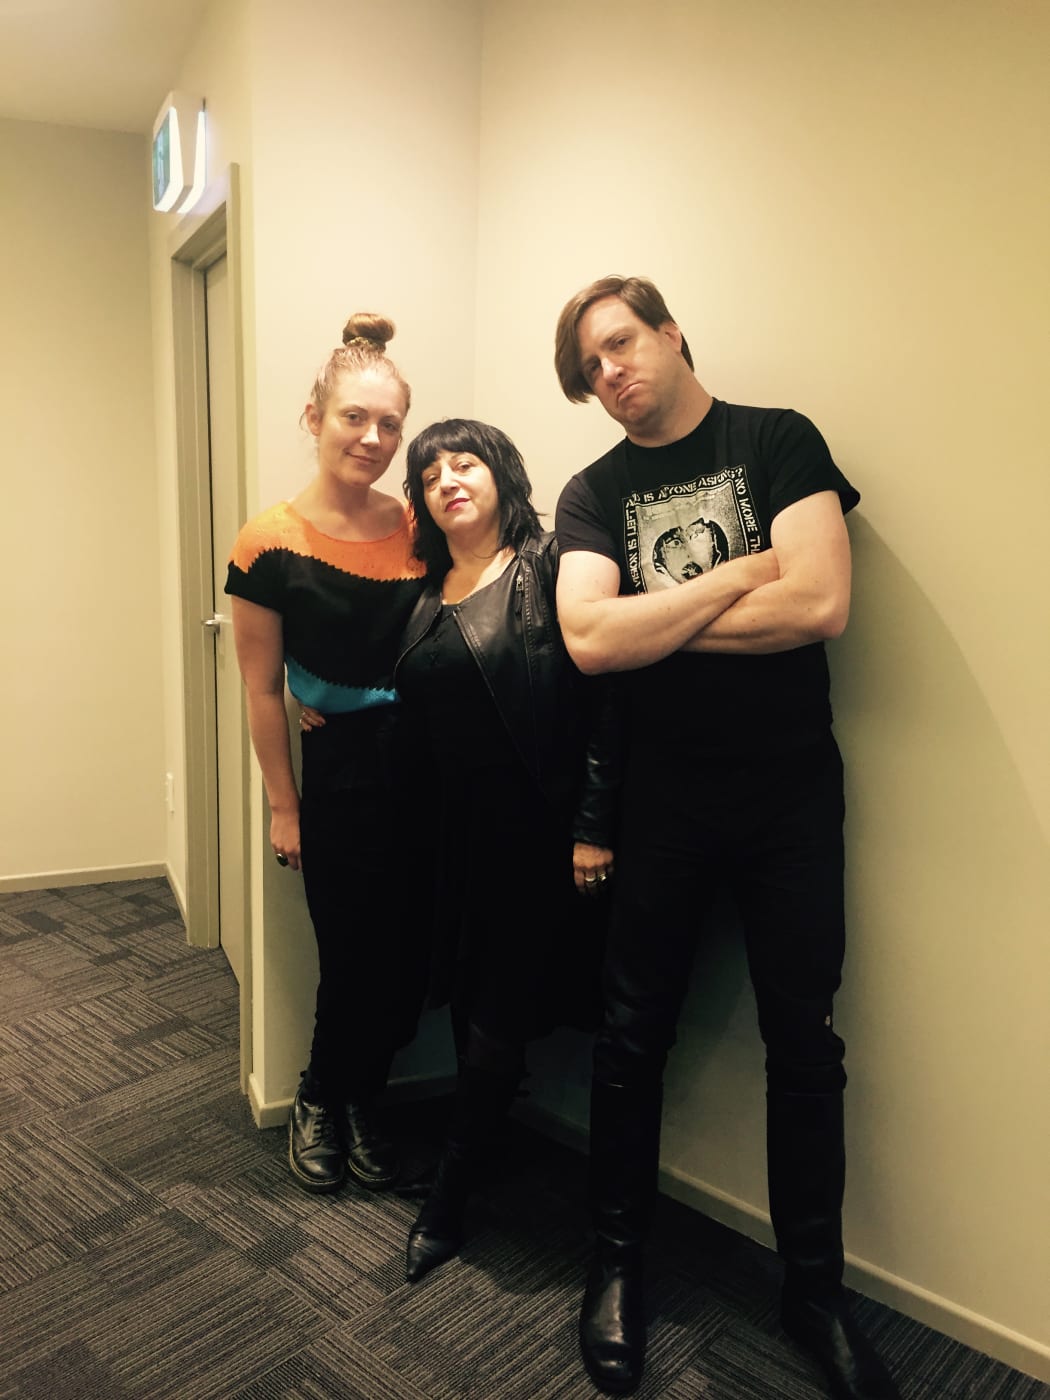 Emma Smith, Lydia Lunch and Weasel Walter